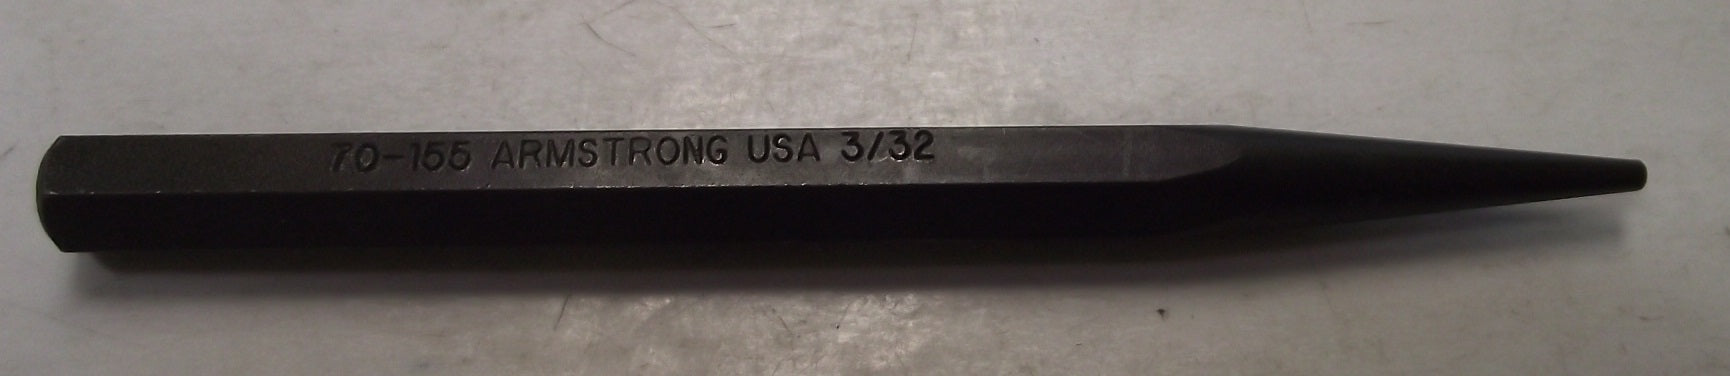 Armstrong 70-155G 3/32" x 5/16" x 4-1/2" Starting Punch USA